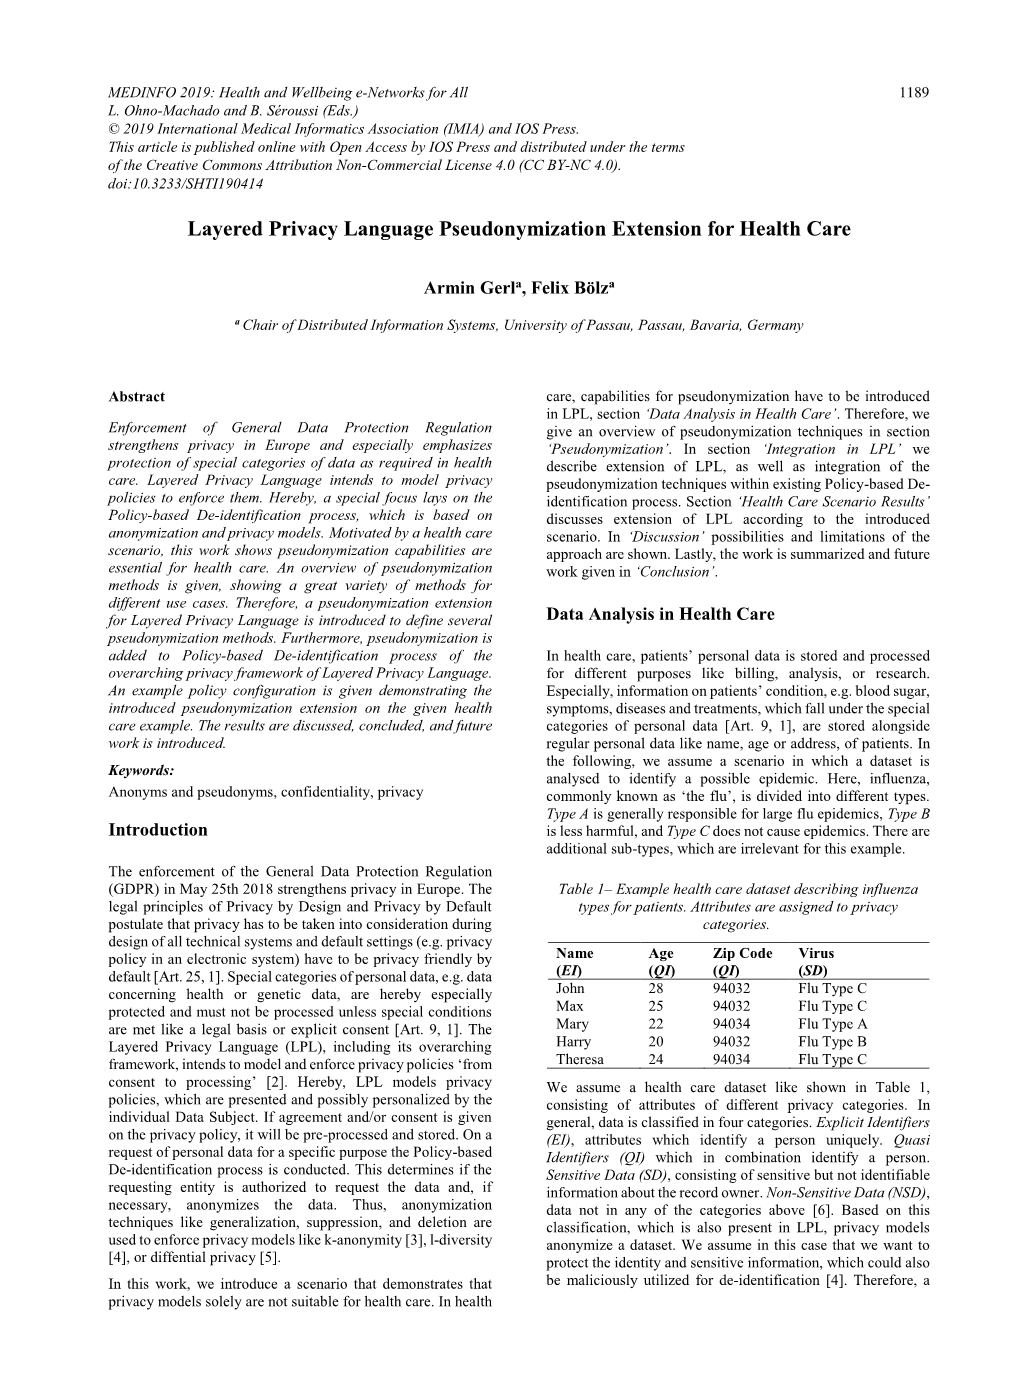 Layered Privacy Language Pseudonymization Extension for Health Care